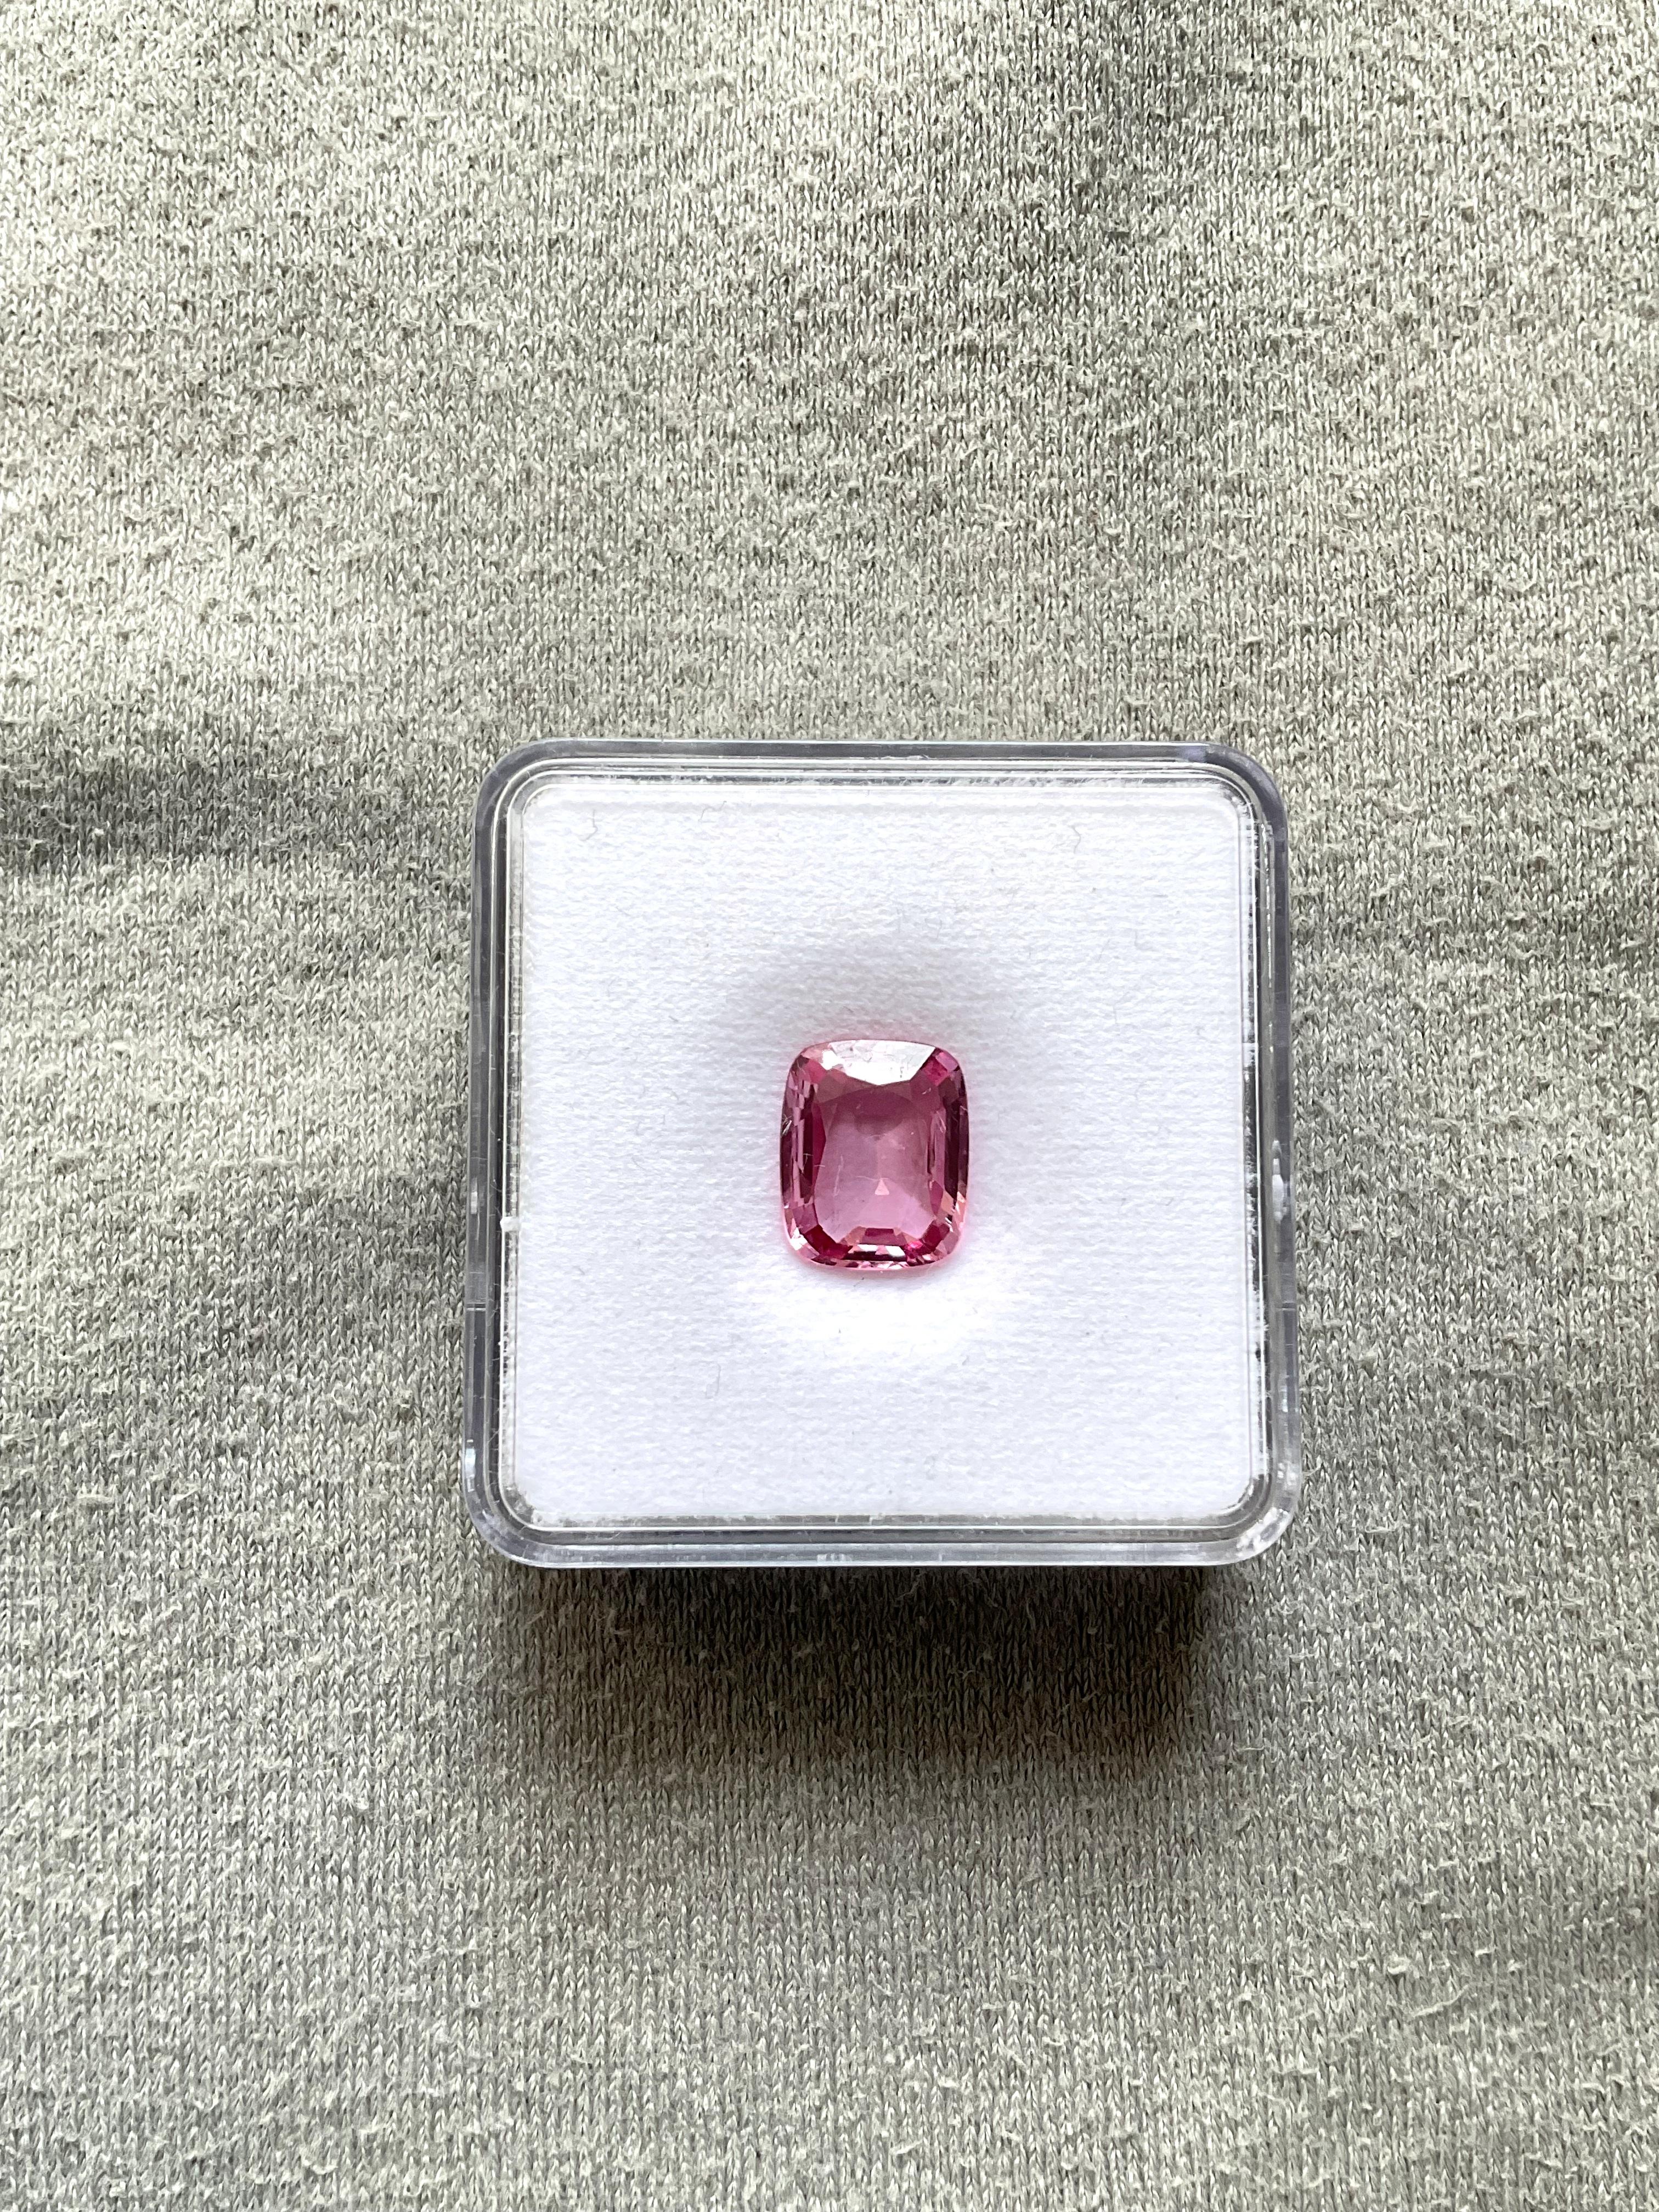 3.24 Carat spinel cushion cut stone for jewelry natural gemstone top quality

Weight: 3.24 Carats
Size: 10.5x8.5x4 MM
Pieces: 1
Shape : cushion
